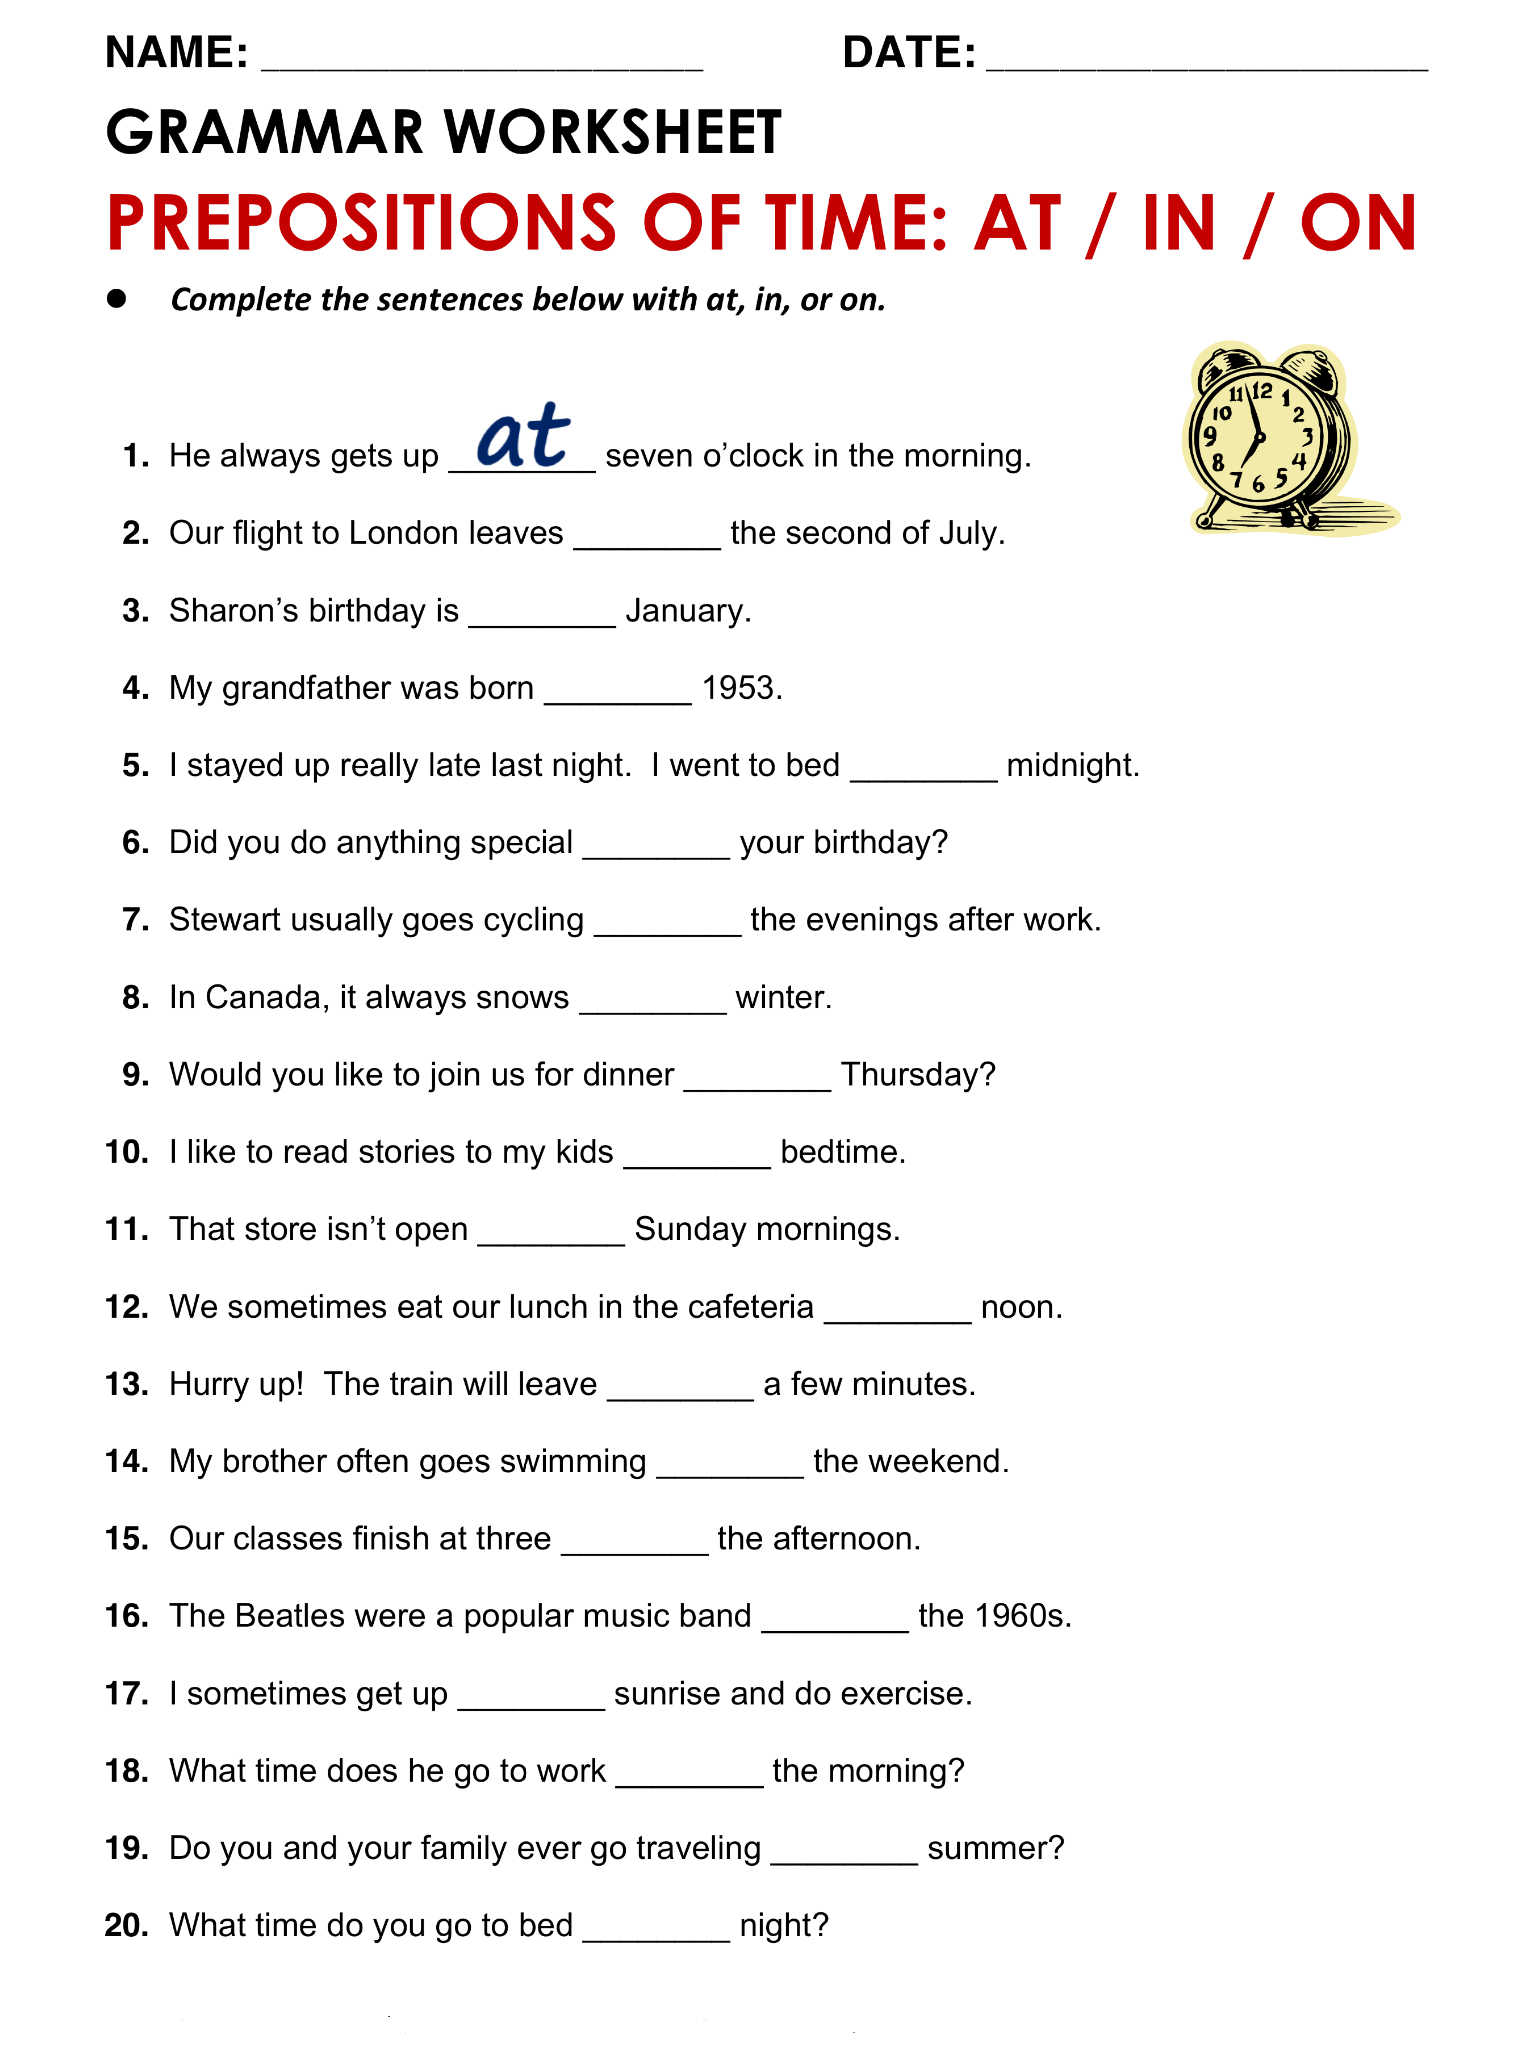 Prepositions elementary. Предлоги at in on Worksheets. In on at time в английском языке Worksheets. On in at в английском Worksheets. Предлоги в английском Worksheets.